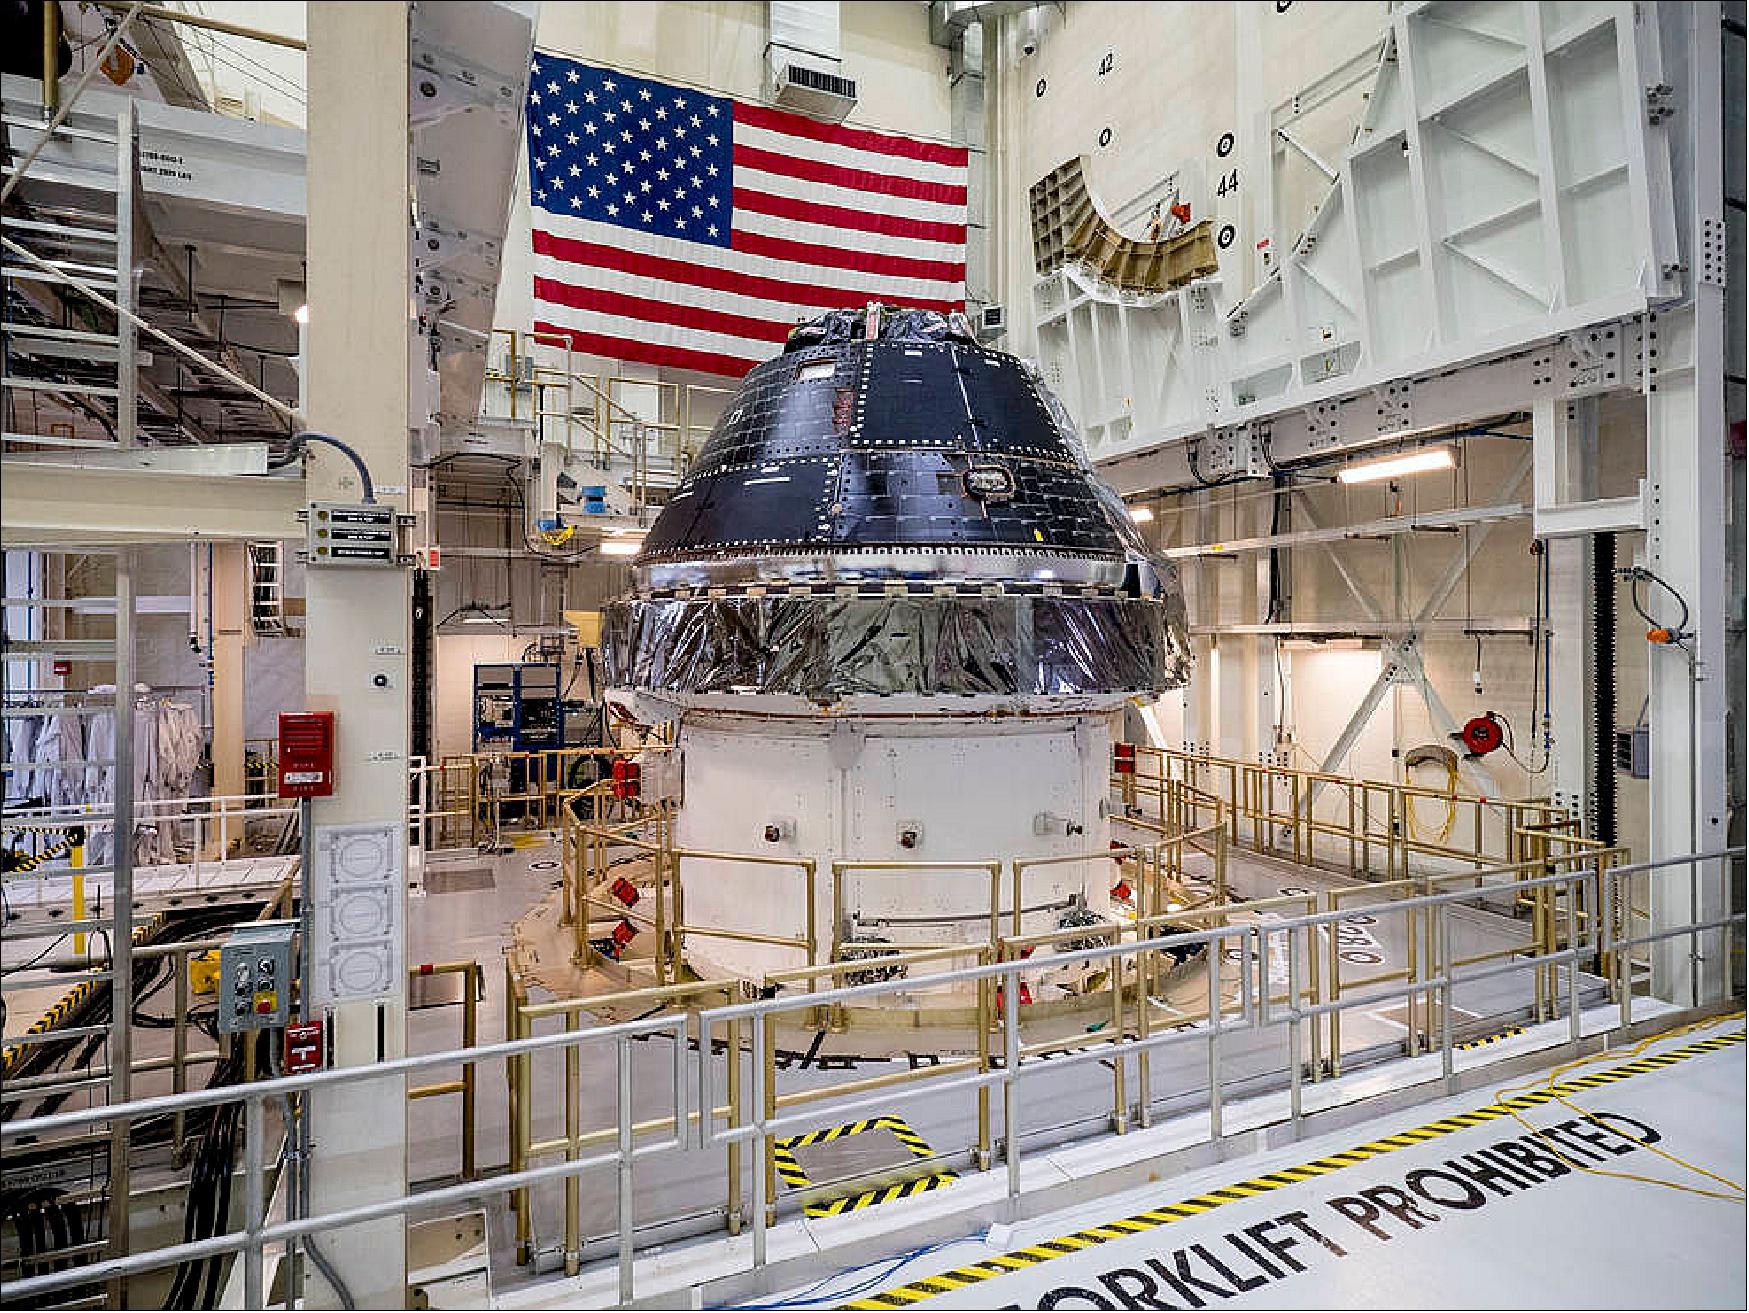 Figure 44: NASA completed building and outfitting the Orion crew capsule for the first Artemis lunar mission in June 2019. The spacecraft is being prepared for its uncrewed test flight atop NASA’s Space Launch System (SLS) rocket. Artemis-1 is the first test flight of the SLS and Orion spacecraft as an integrated system and will send Orion thousands of miles beyond the Moon and back to Earth (image credit: NASA, Radislav Sinyak)